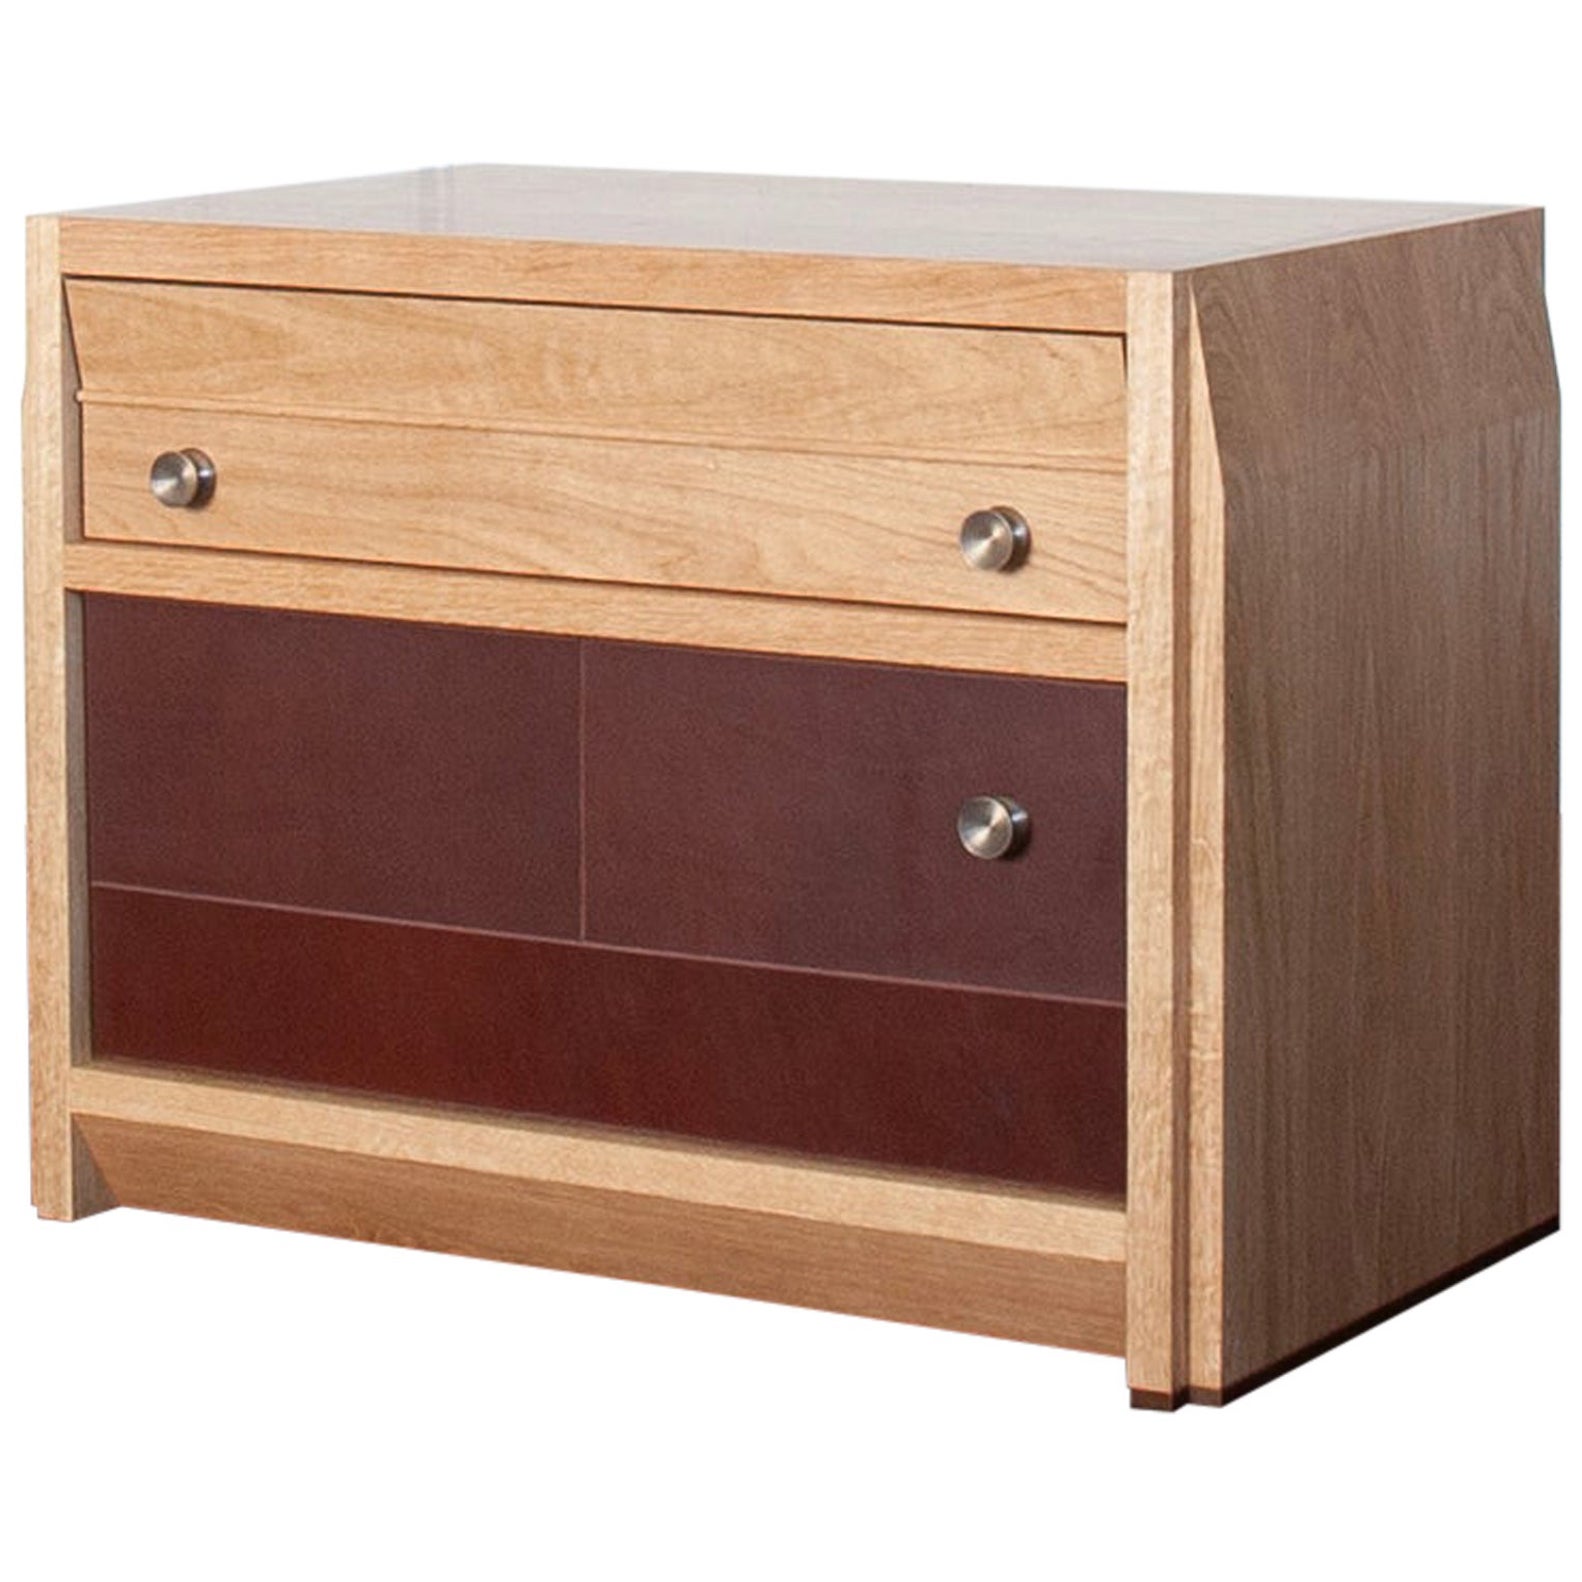 READY TO SHIP Octavia nightstands by Crump and Kwash / White oak and Leather 